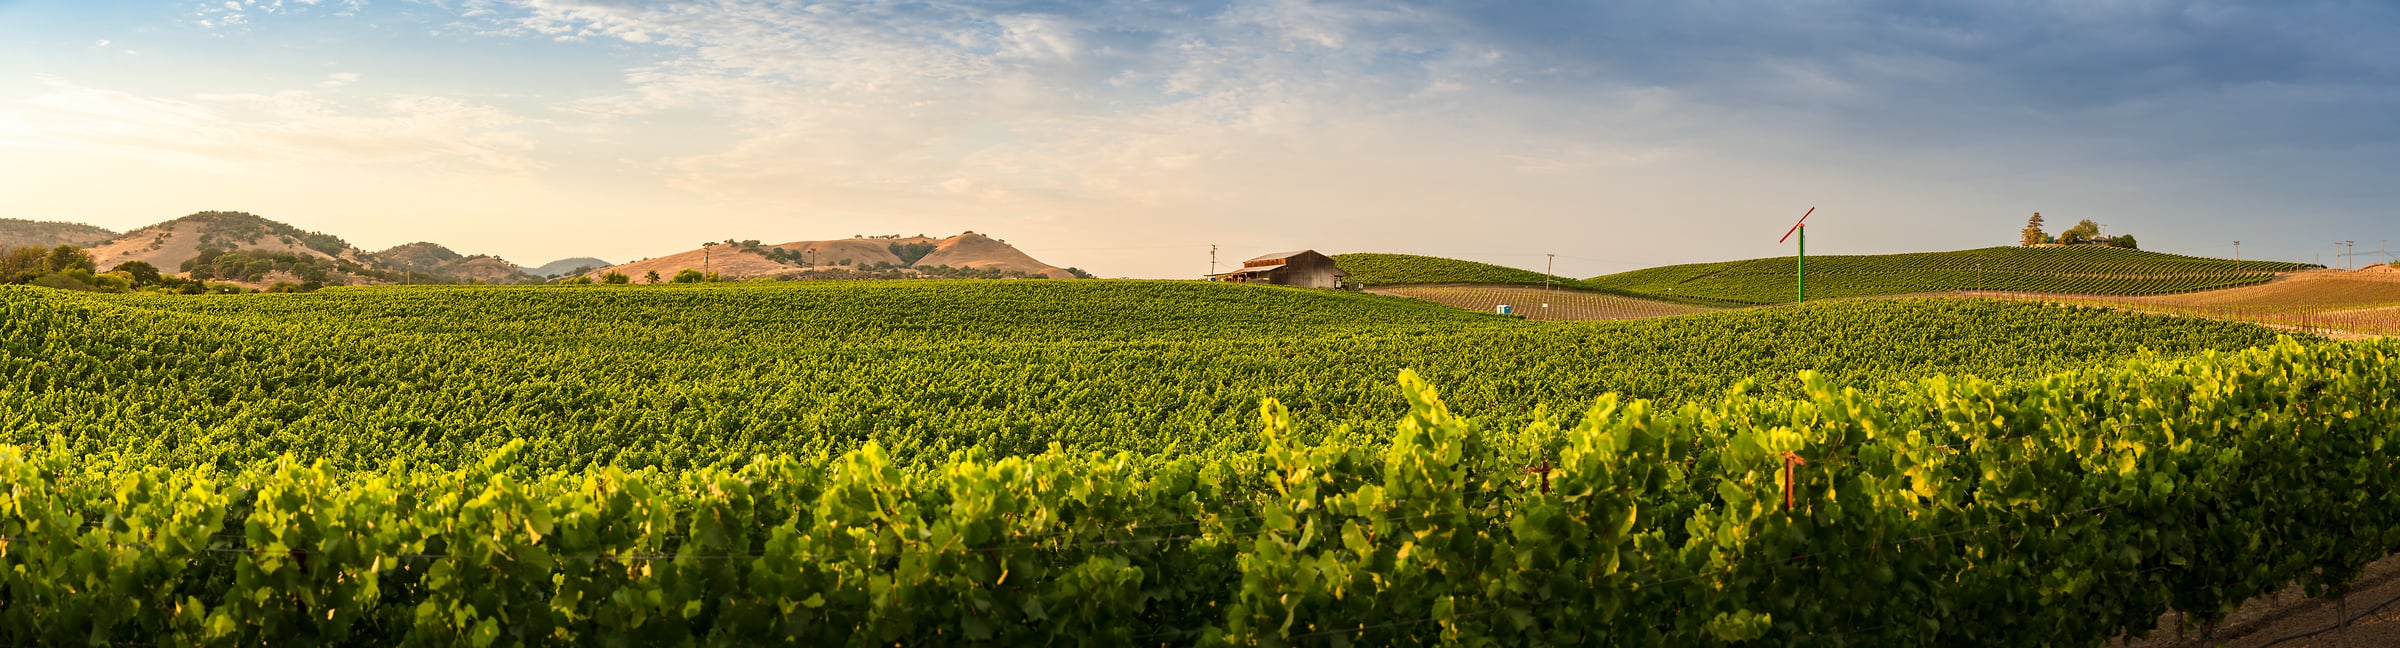 317 megapixels! A very high resolution, panorama photo print of an idyllic vineyard in Napa, California; landscape photograph created by Jeff Lewis.